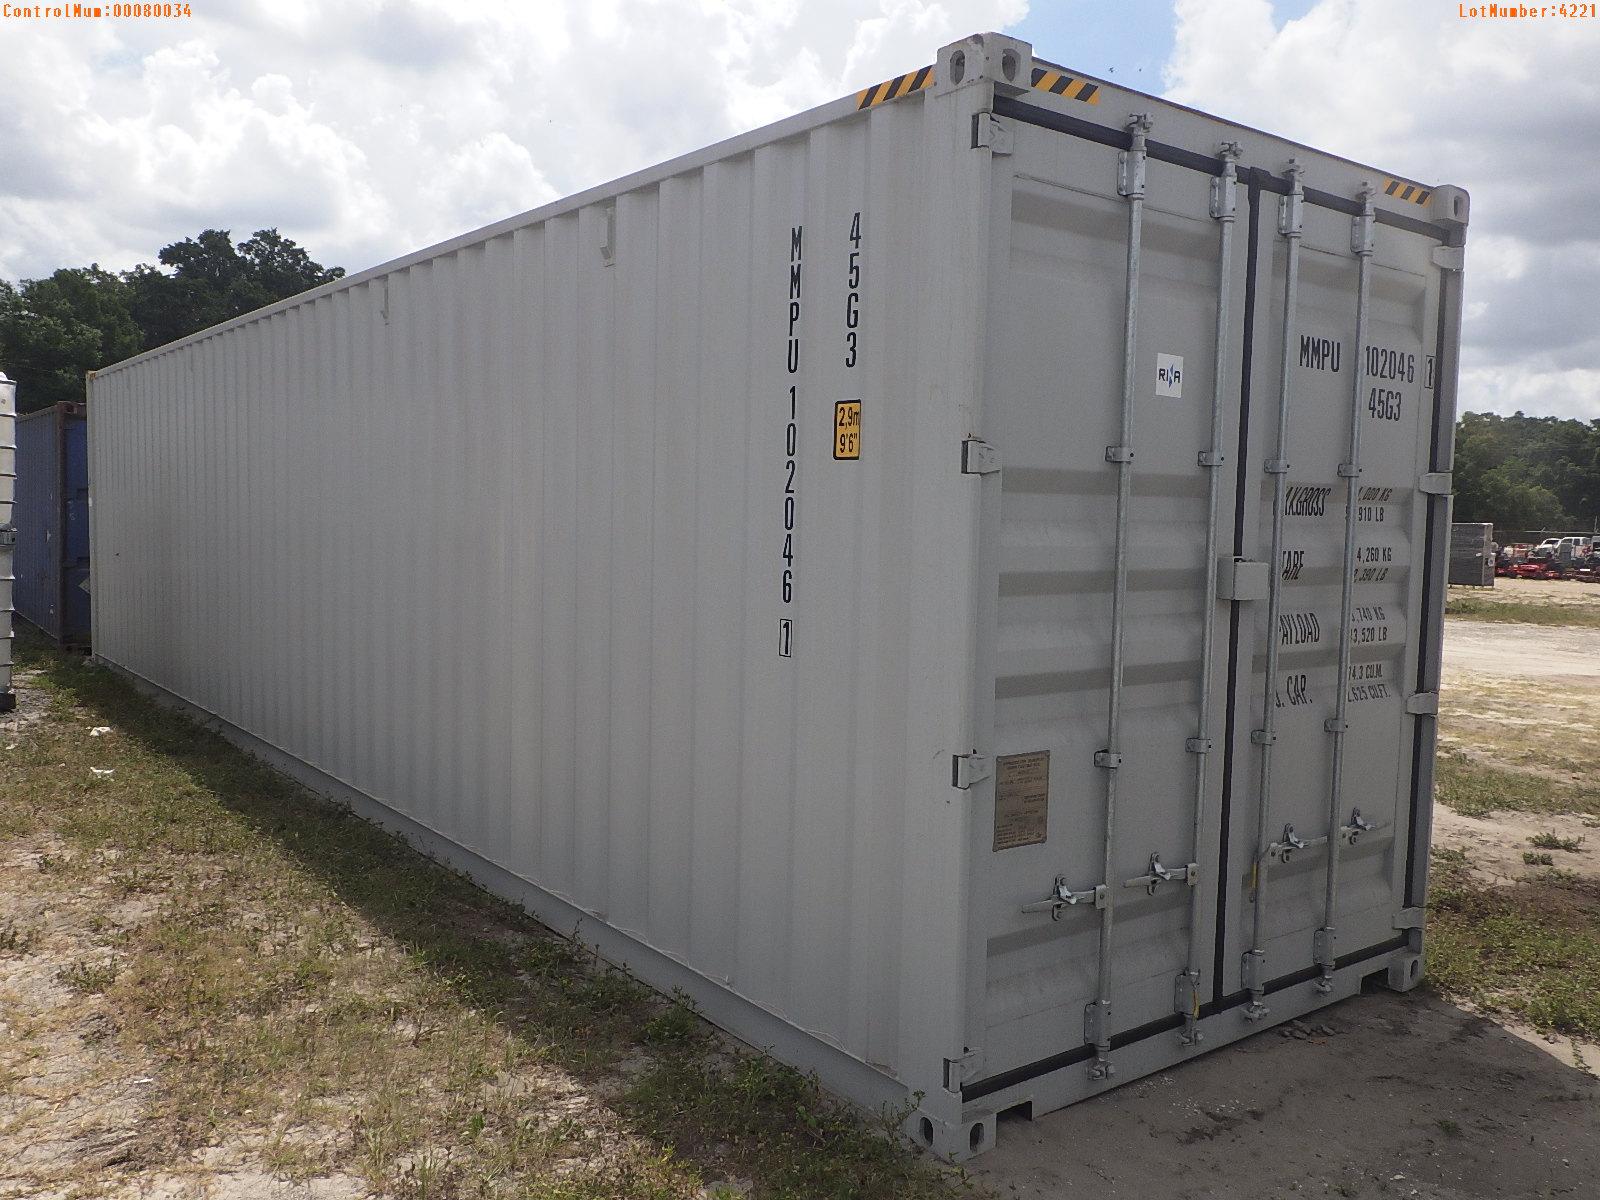 5-04221 (Equip.-Container)  Seller:Private/Dealer 40 FOOT METAL SHIPPING CONTAIN